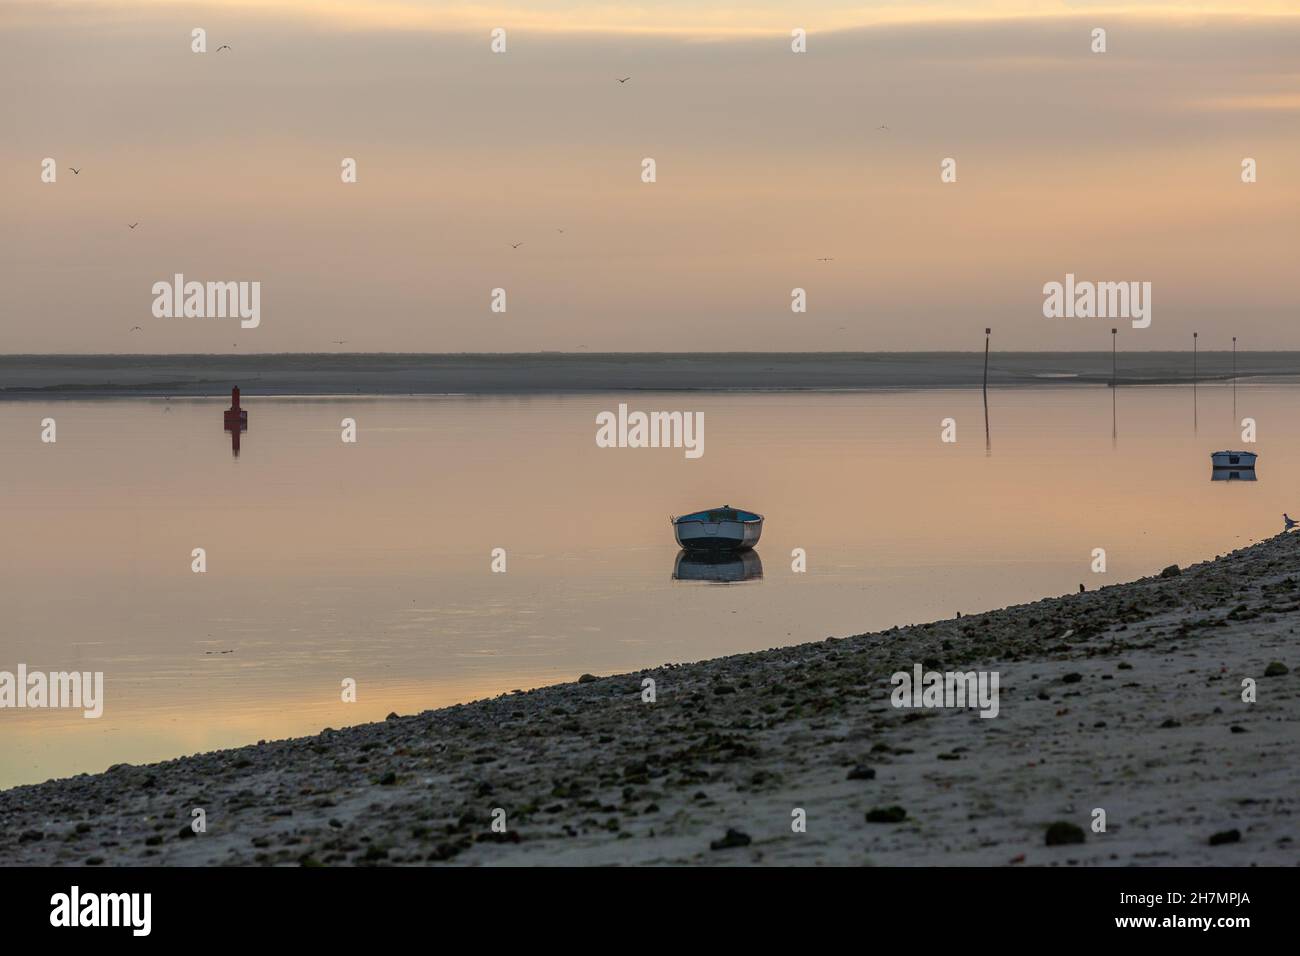 Rowboats moored in the Baie de Somme at low tide. Saint-Valery, France Stock Photo